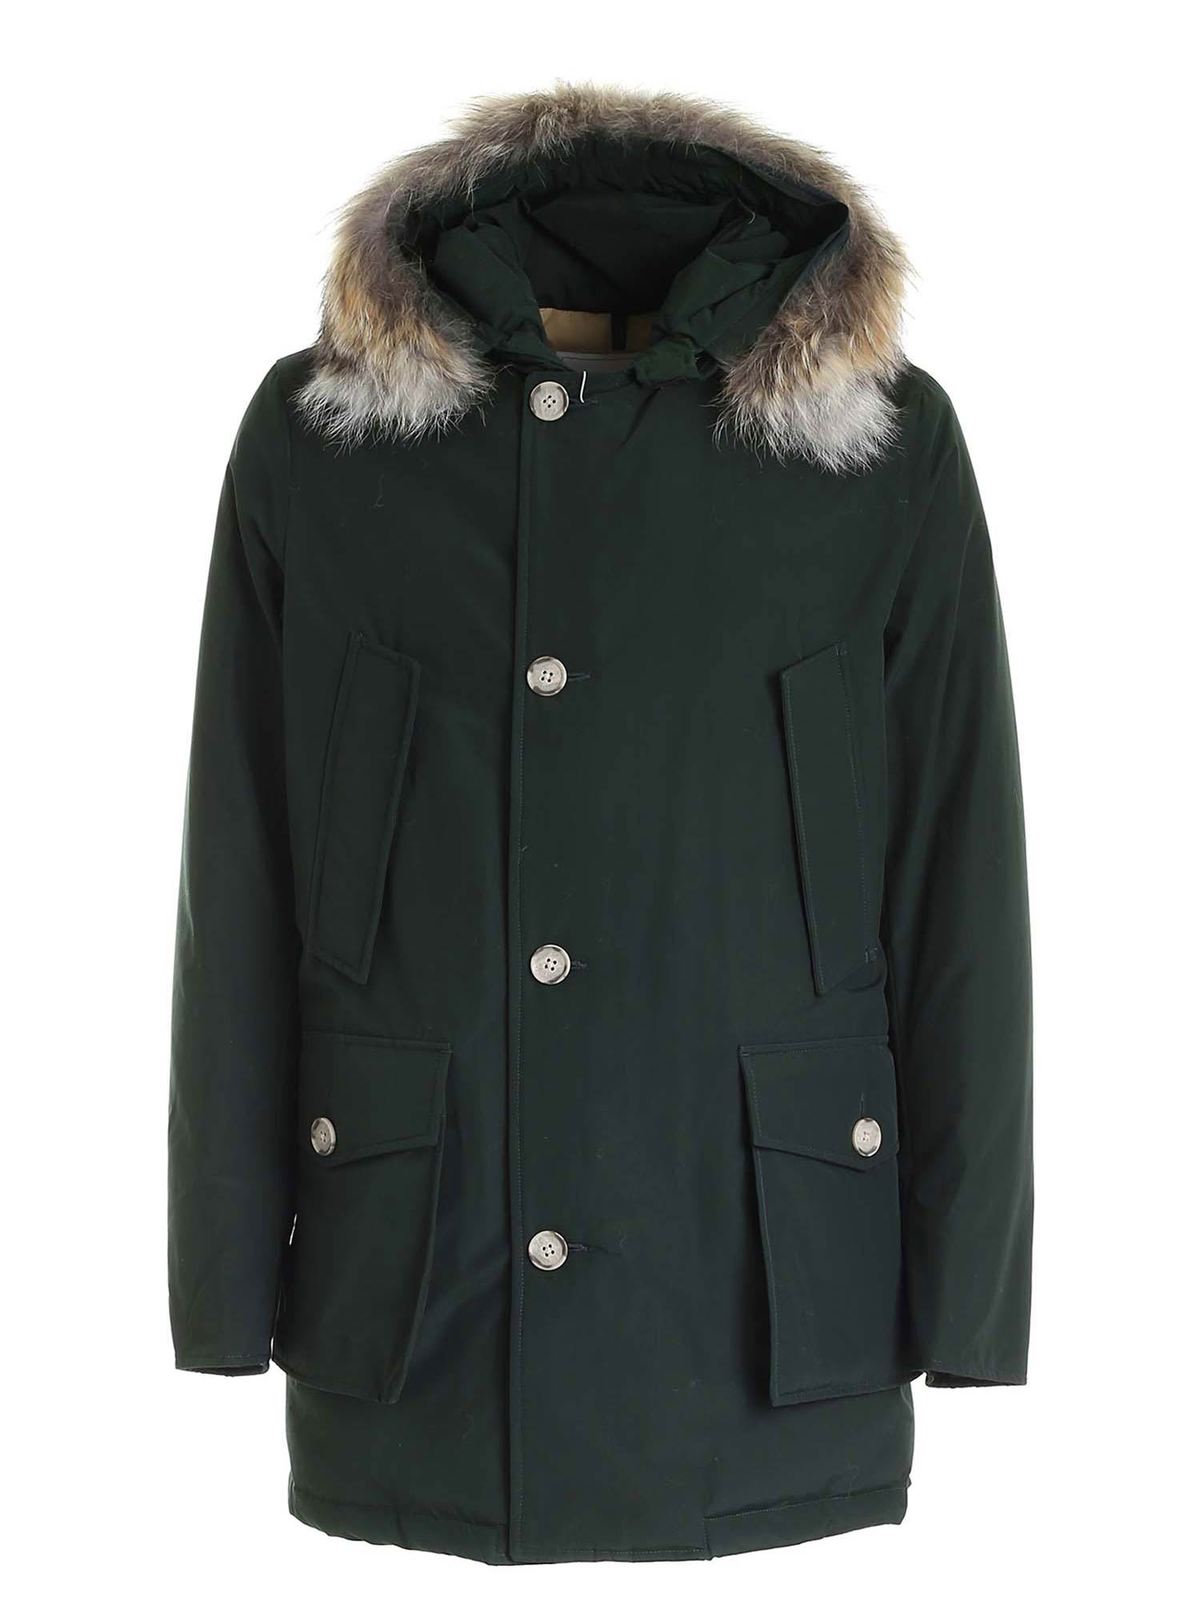 Woolrich - Artic Parka down jacket in green - padded coats ...